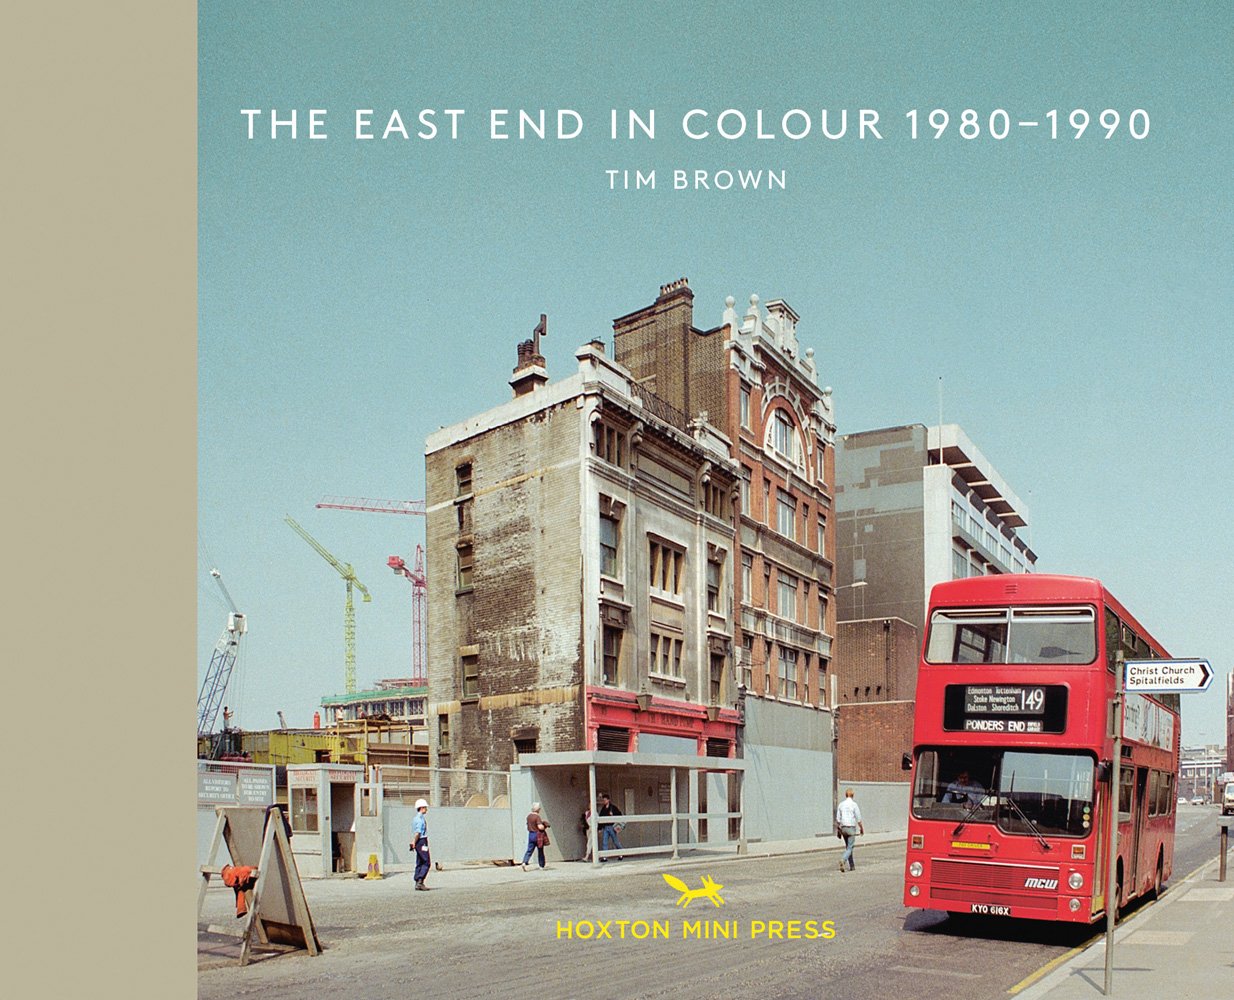 Bishopsgate, 1988, with high storey building, red bus packed by side of road, on landscape cover of 'The East End In Colour 1980-1990', by Hoxton Mini Press.